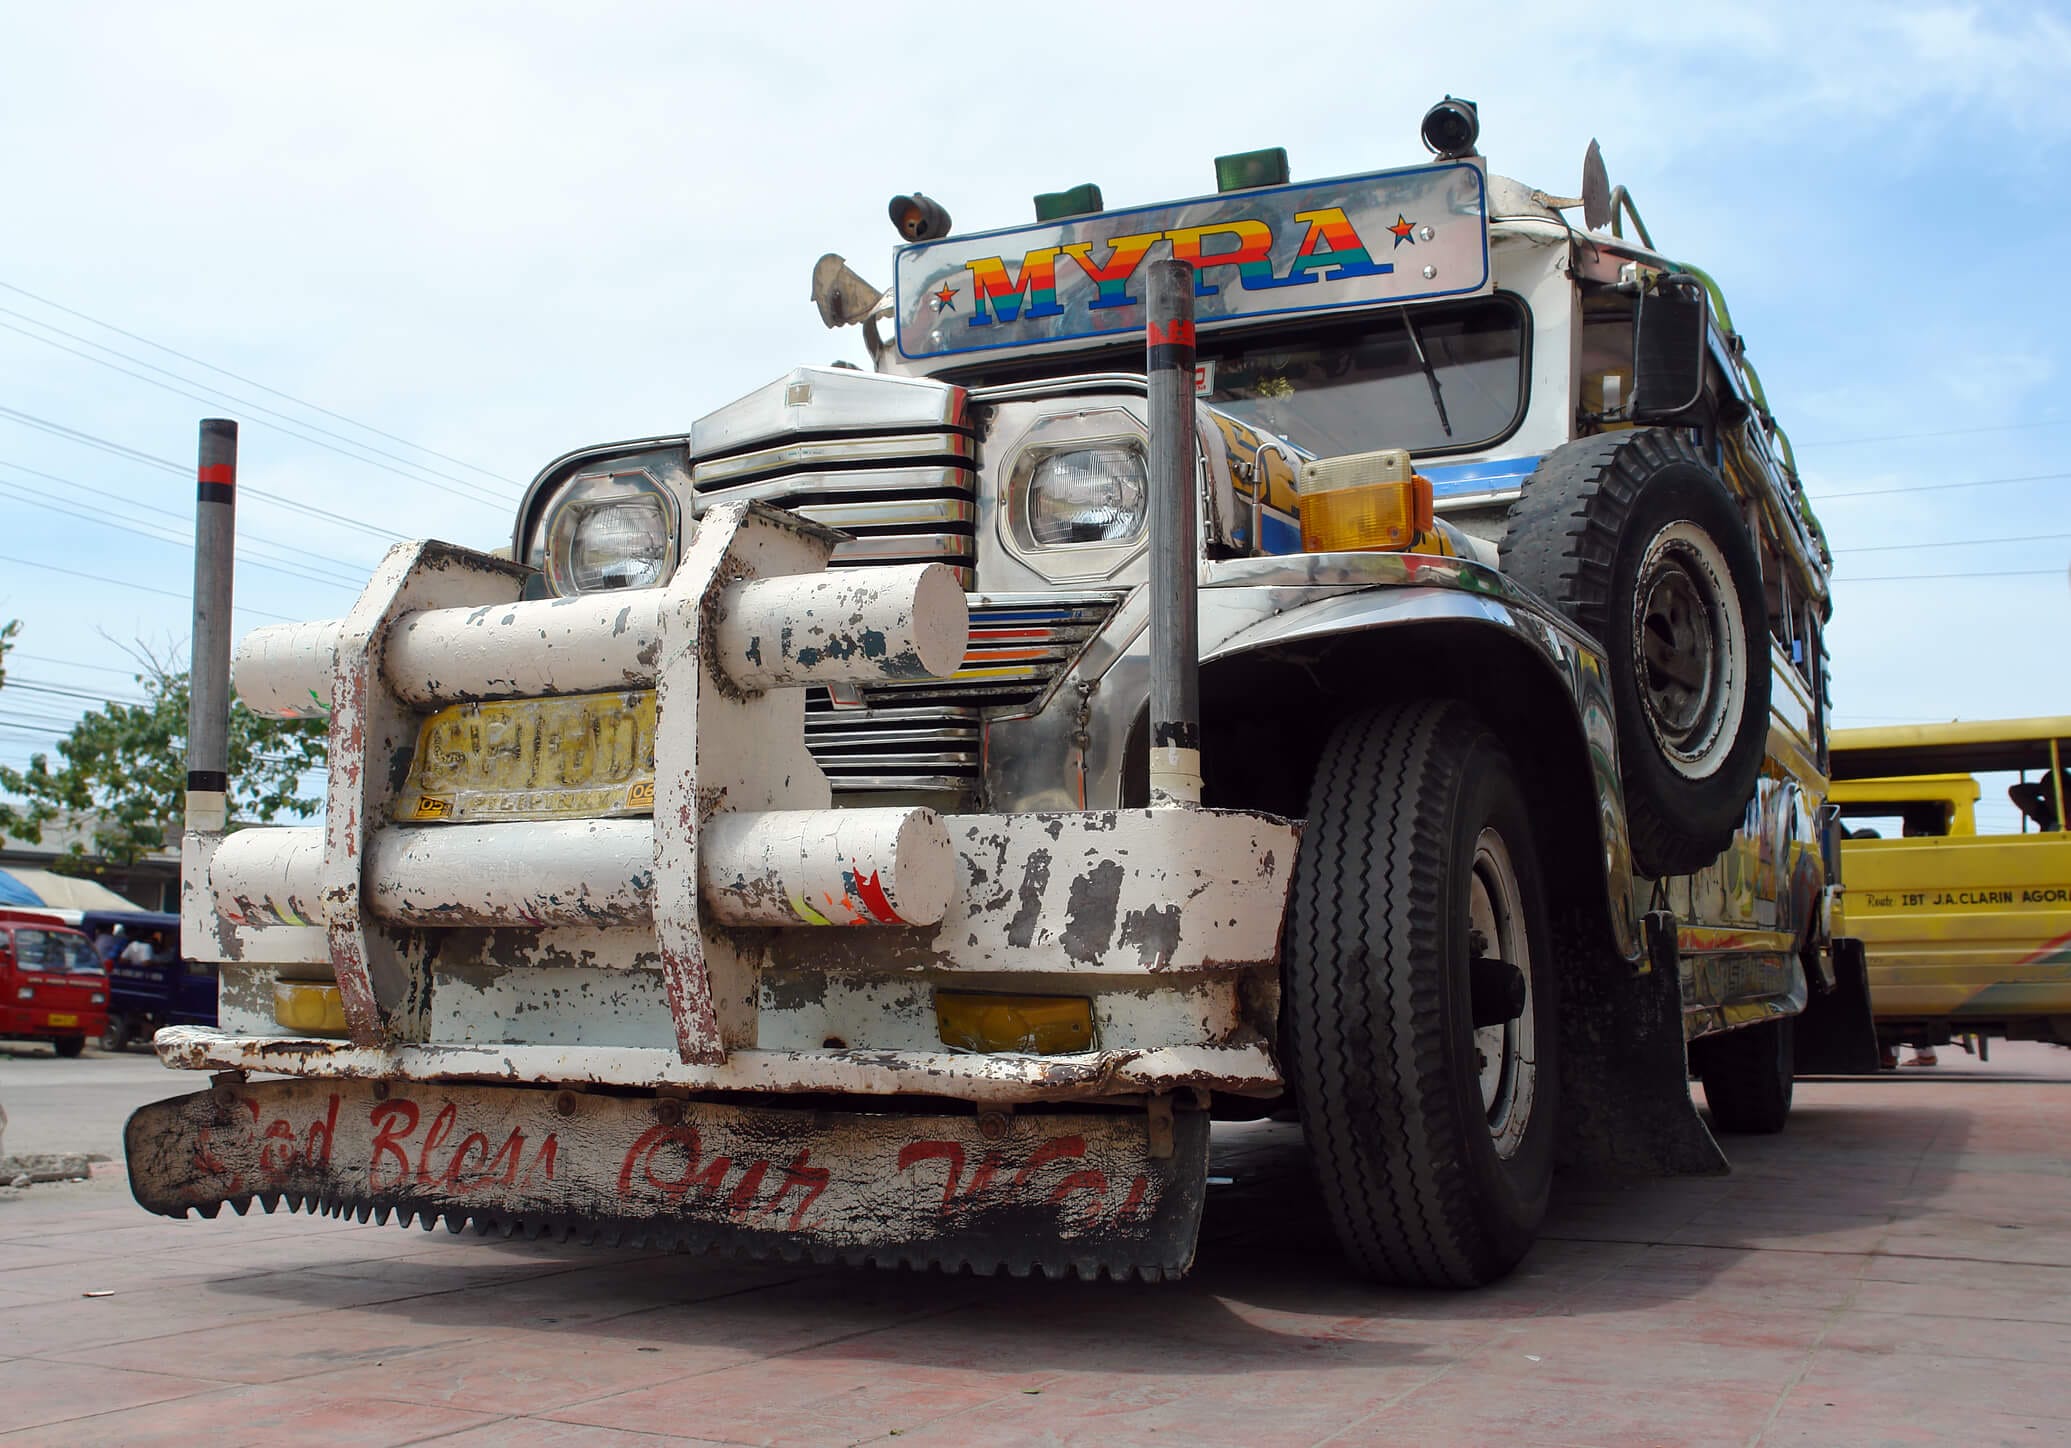 Air Pollution from Jeepneys